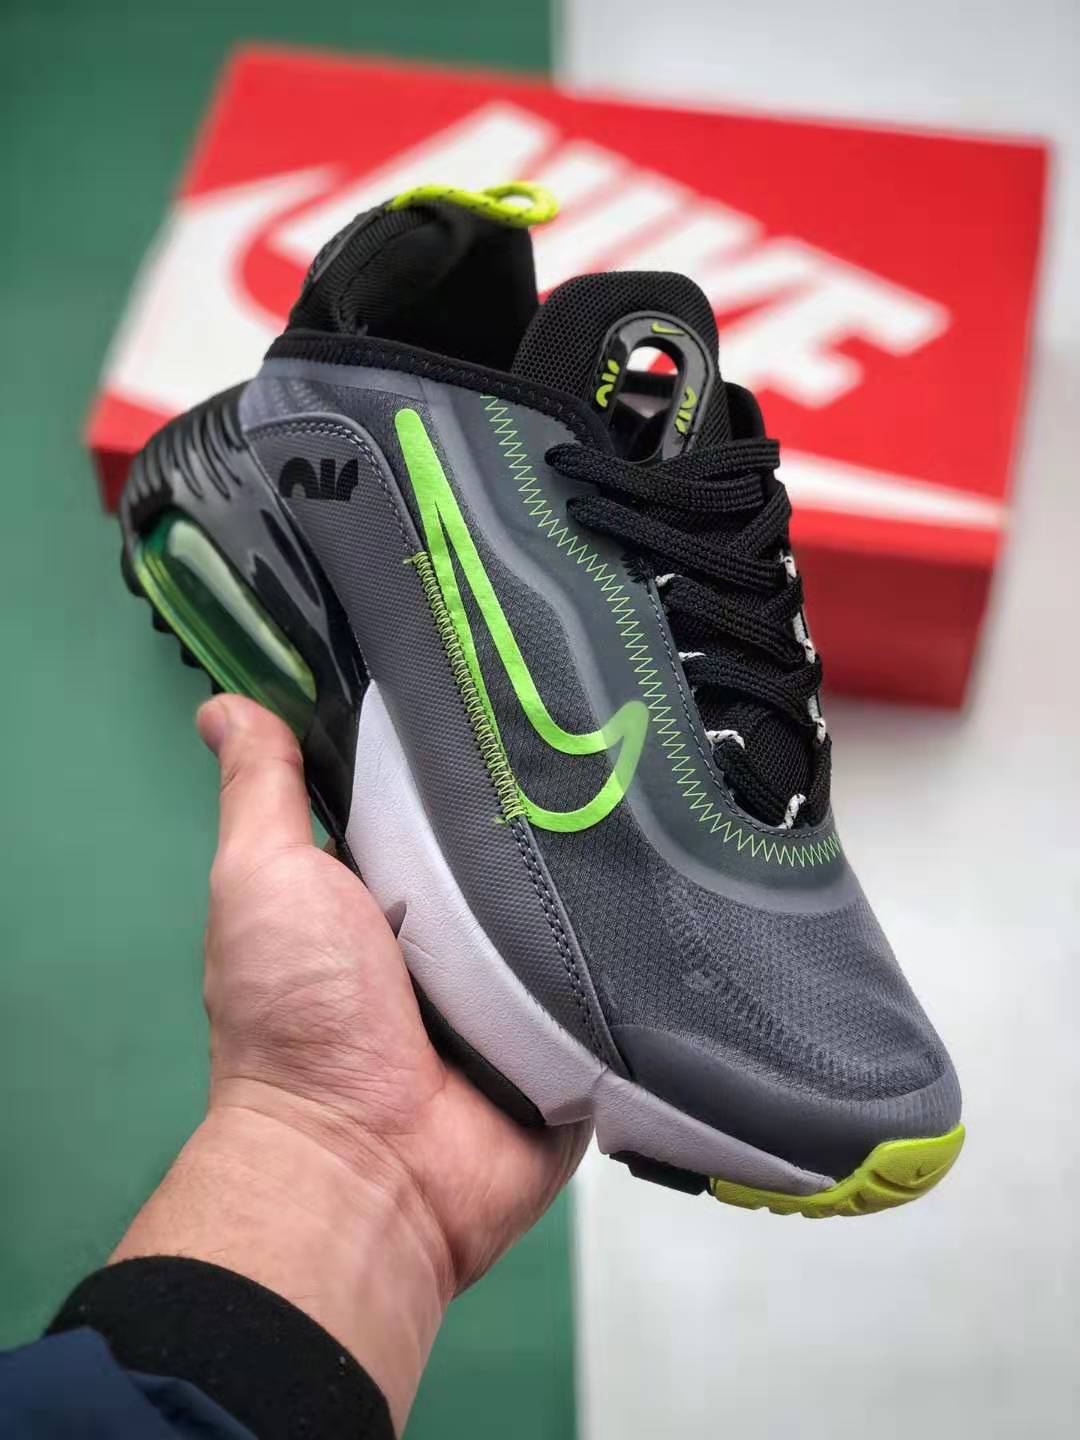 Nike Air Max 2090 Silver Grey Black Fluorescent Green CT7698-011 - Trendy & Stylish Sneakers